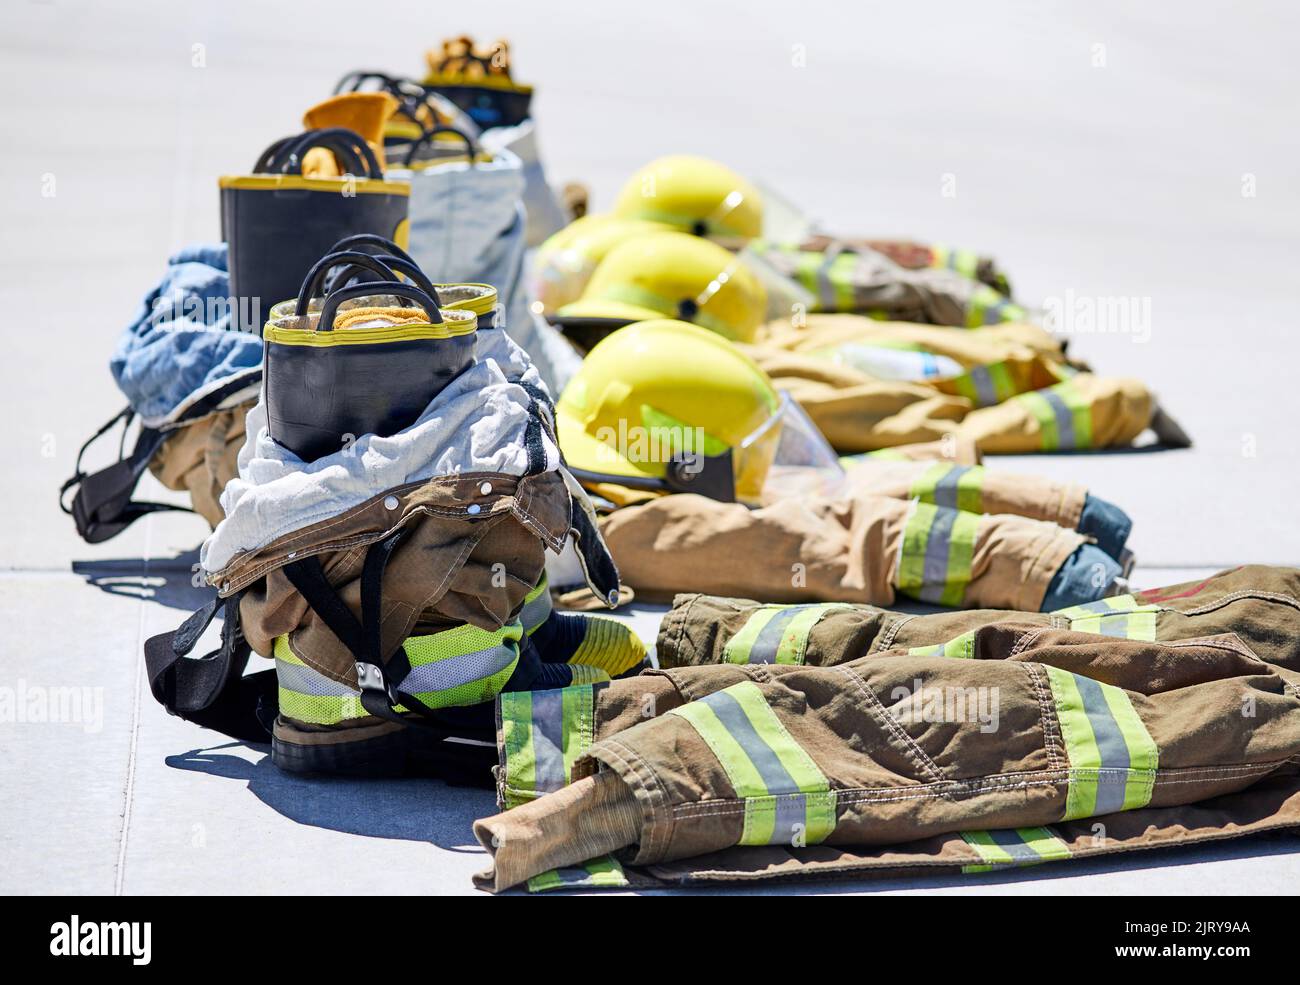 Newly recruited cadet fire firefighters training gear Stock Photo